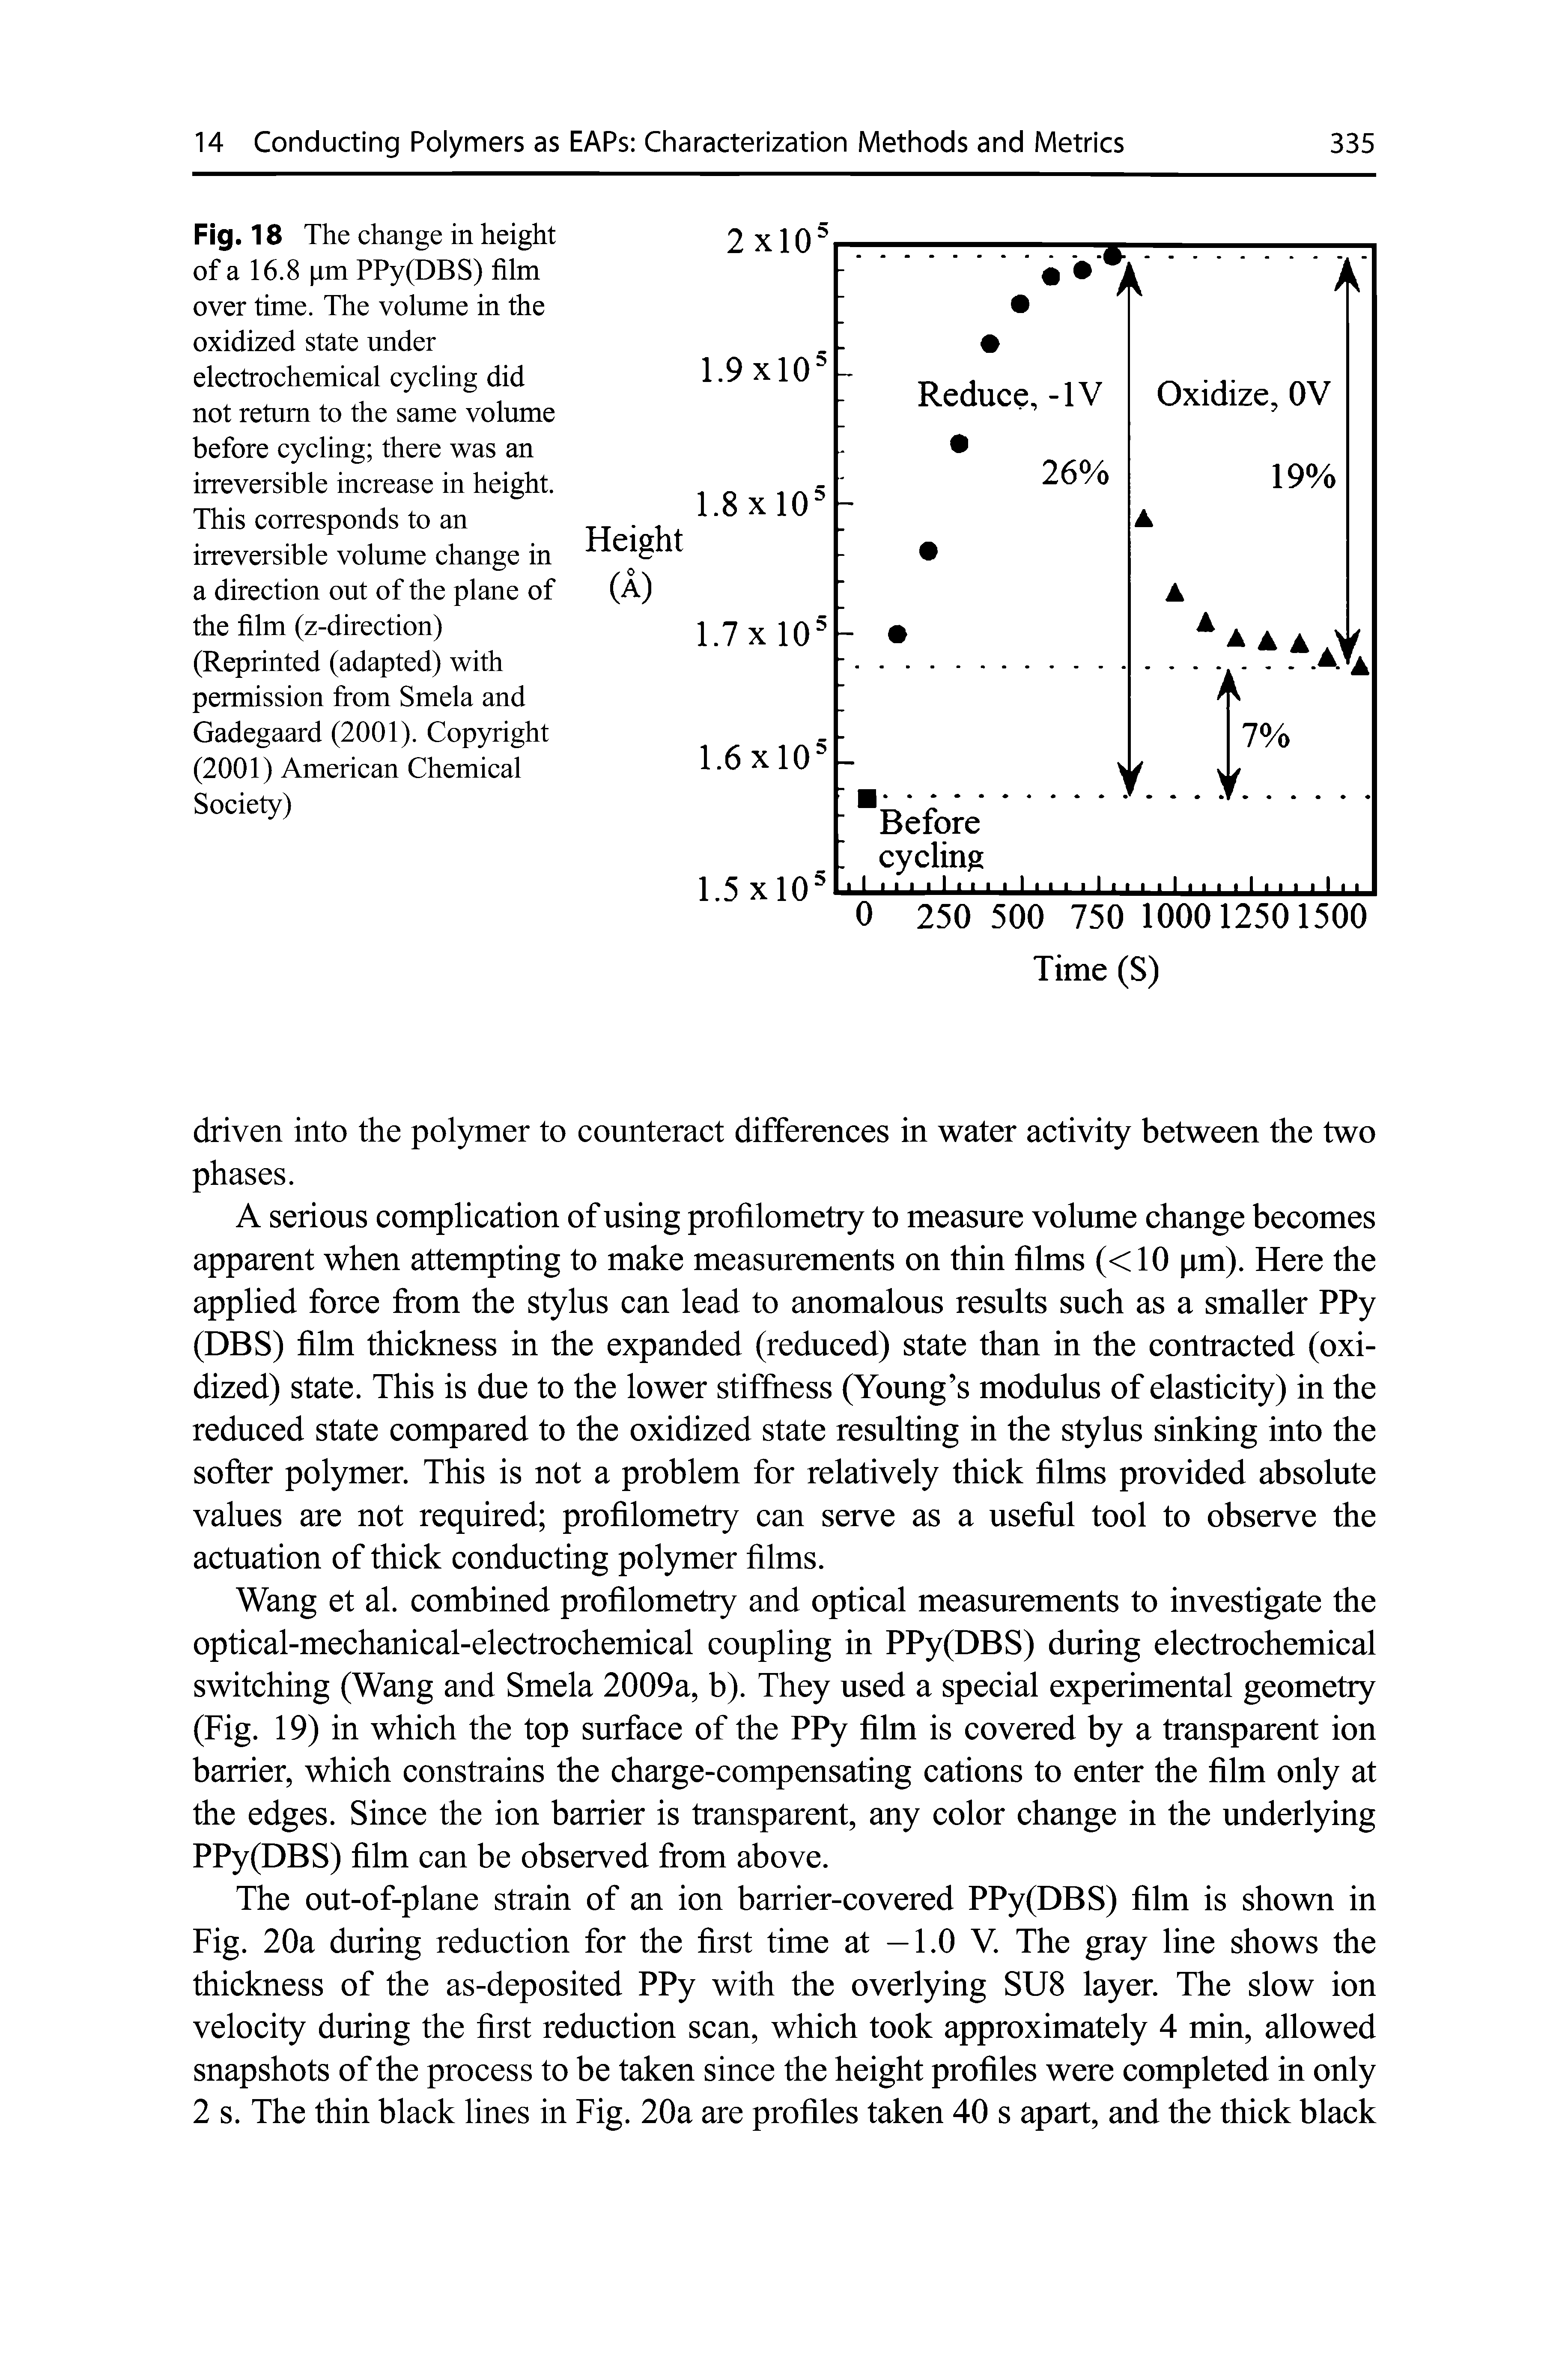 Fig. 18 The change in height of a 16.8 [im PPy(DBS) film over time. The volume in the oxidized state under electrochemical cycling did not return to the same volume before cycling there was an irreversible increase in height. This corresponds to an irreversible volume change in a direction out of the plane of the film (z-direction) (Reprinted (adapted) with permission from Smela and Gadegaard (2001). Copyright (2001) American Chemical Society)...